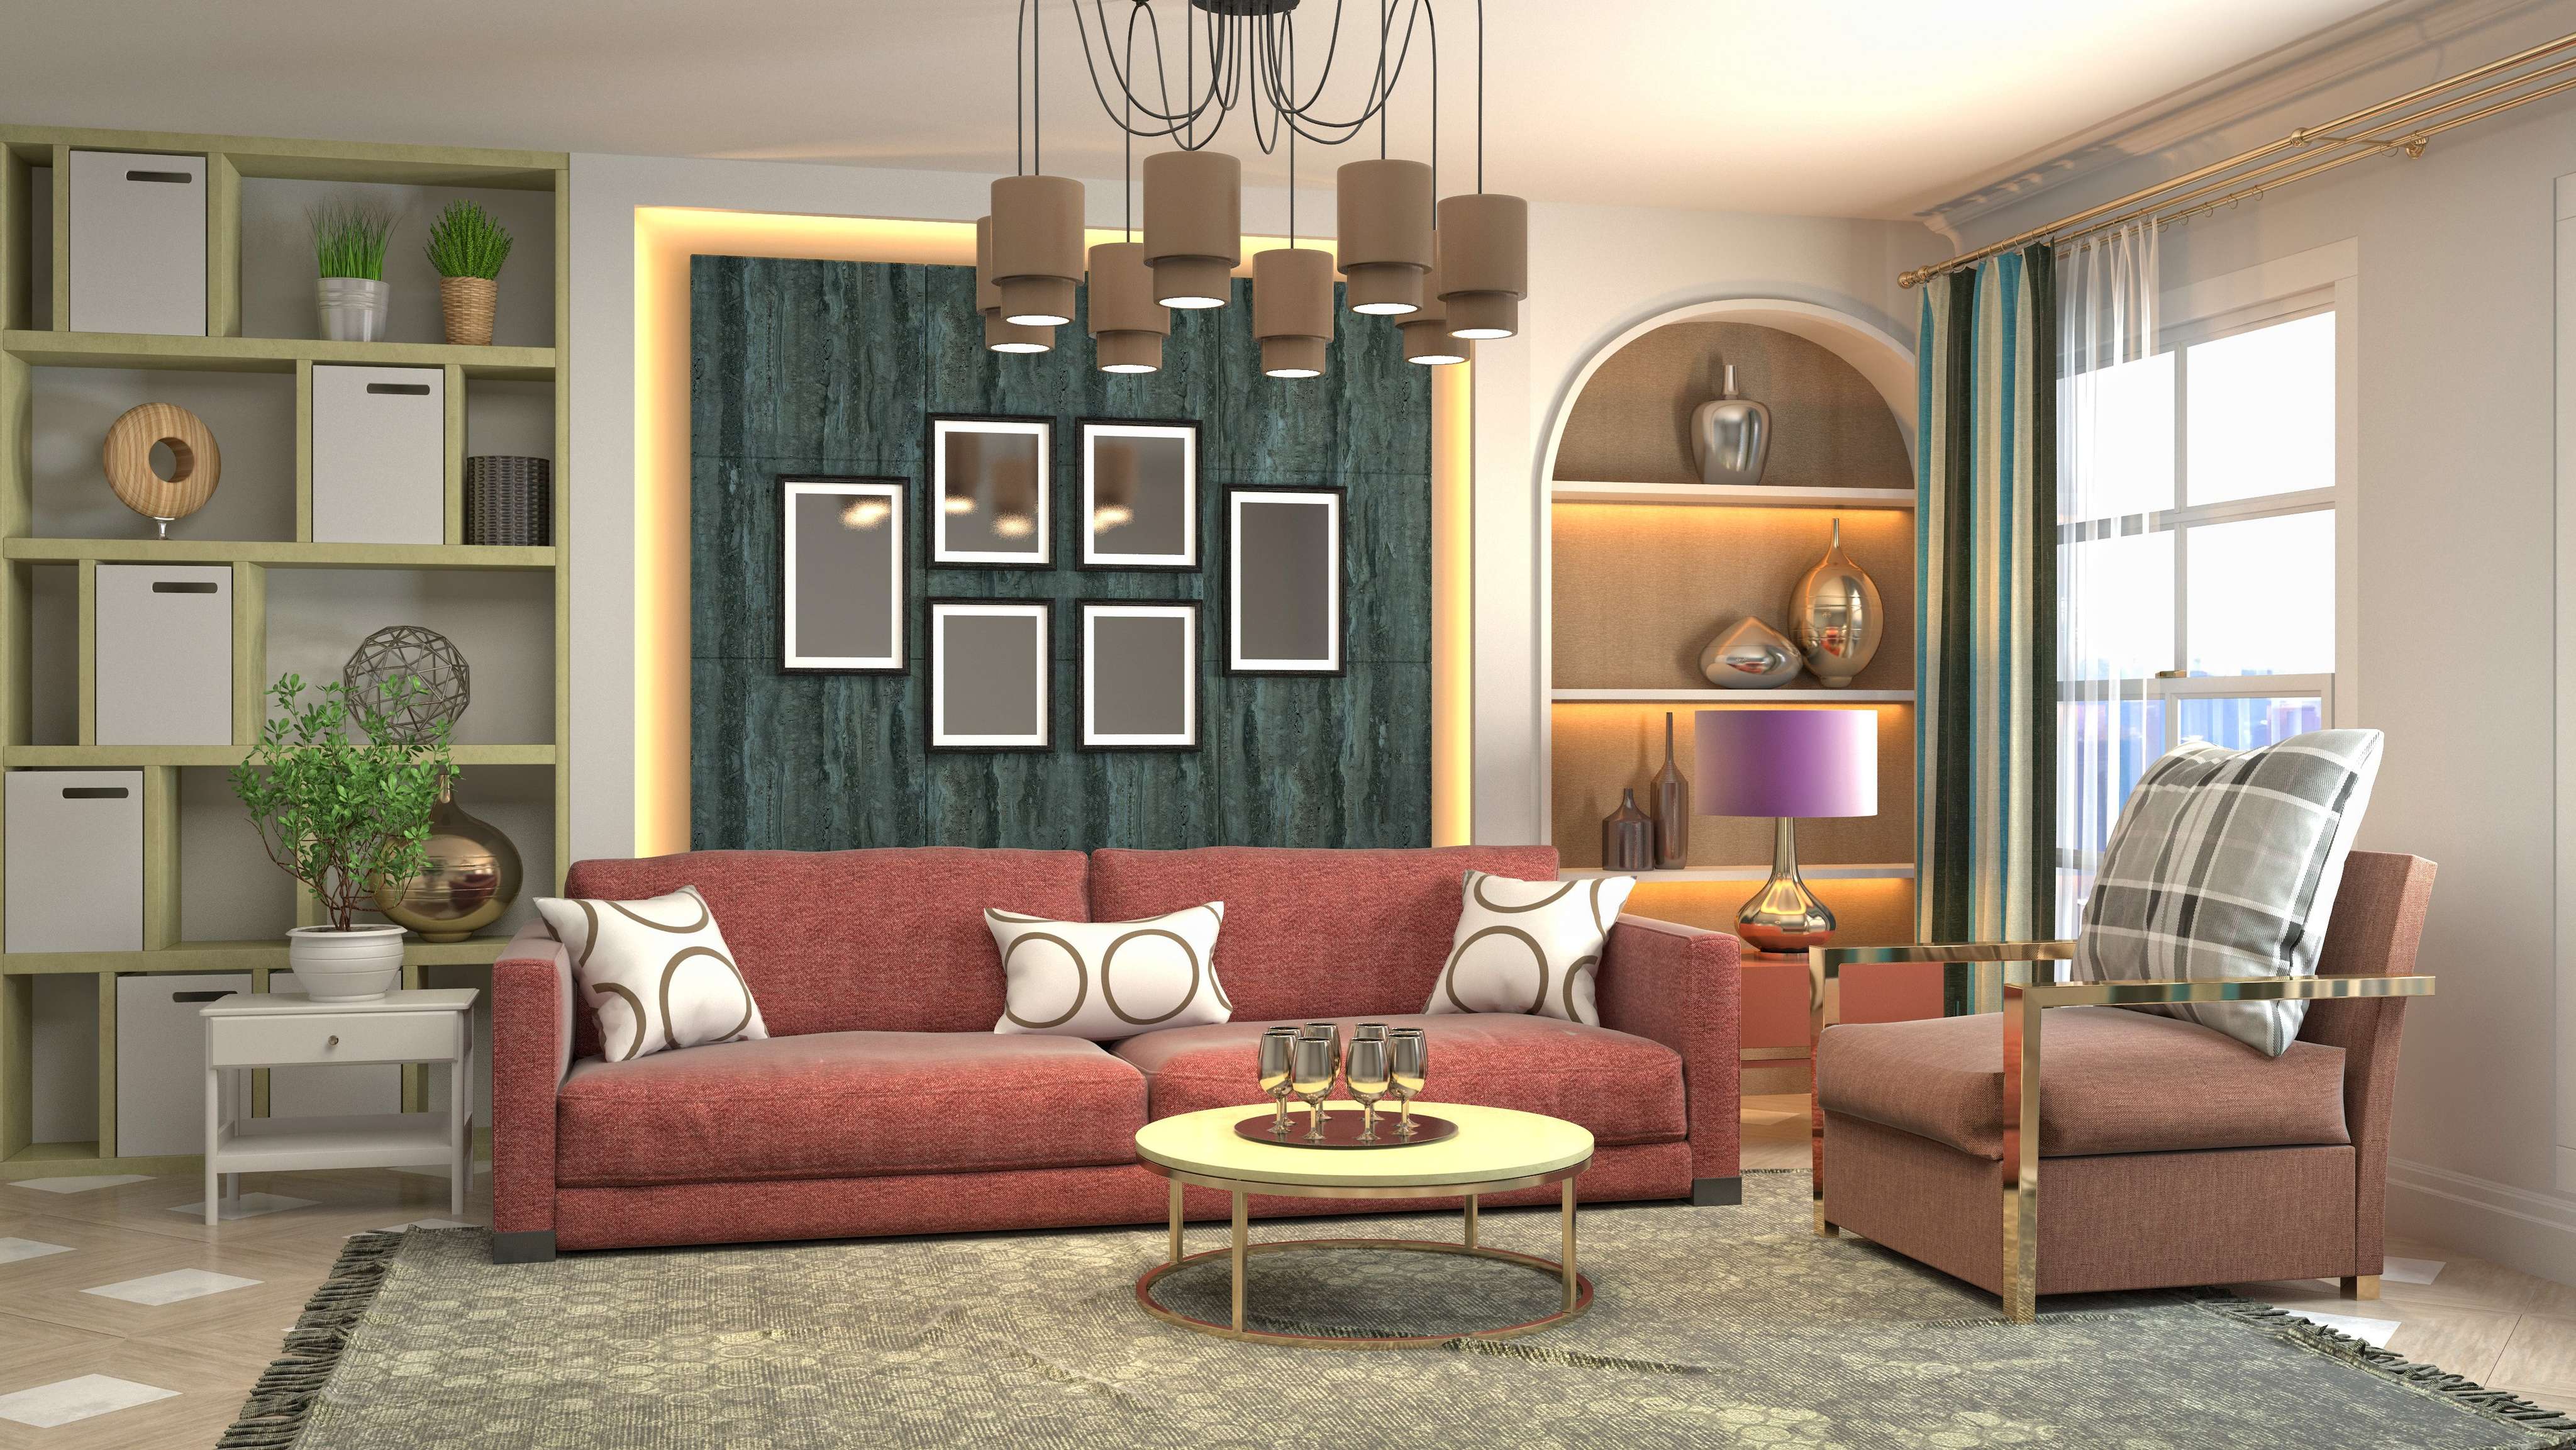 Colourful Living Room Design Featuring Accent Wall